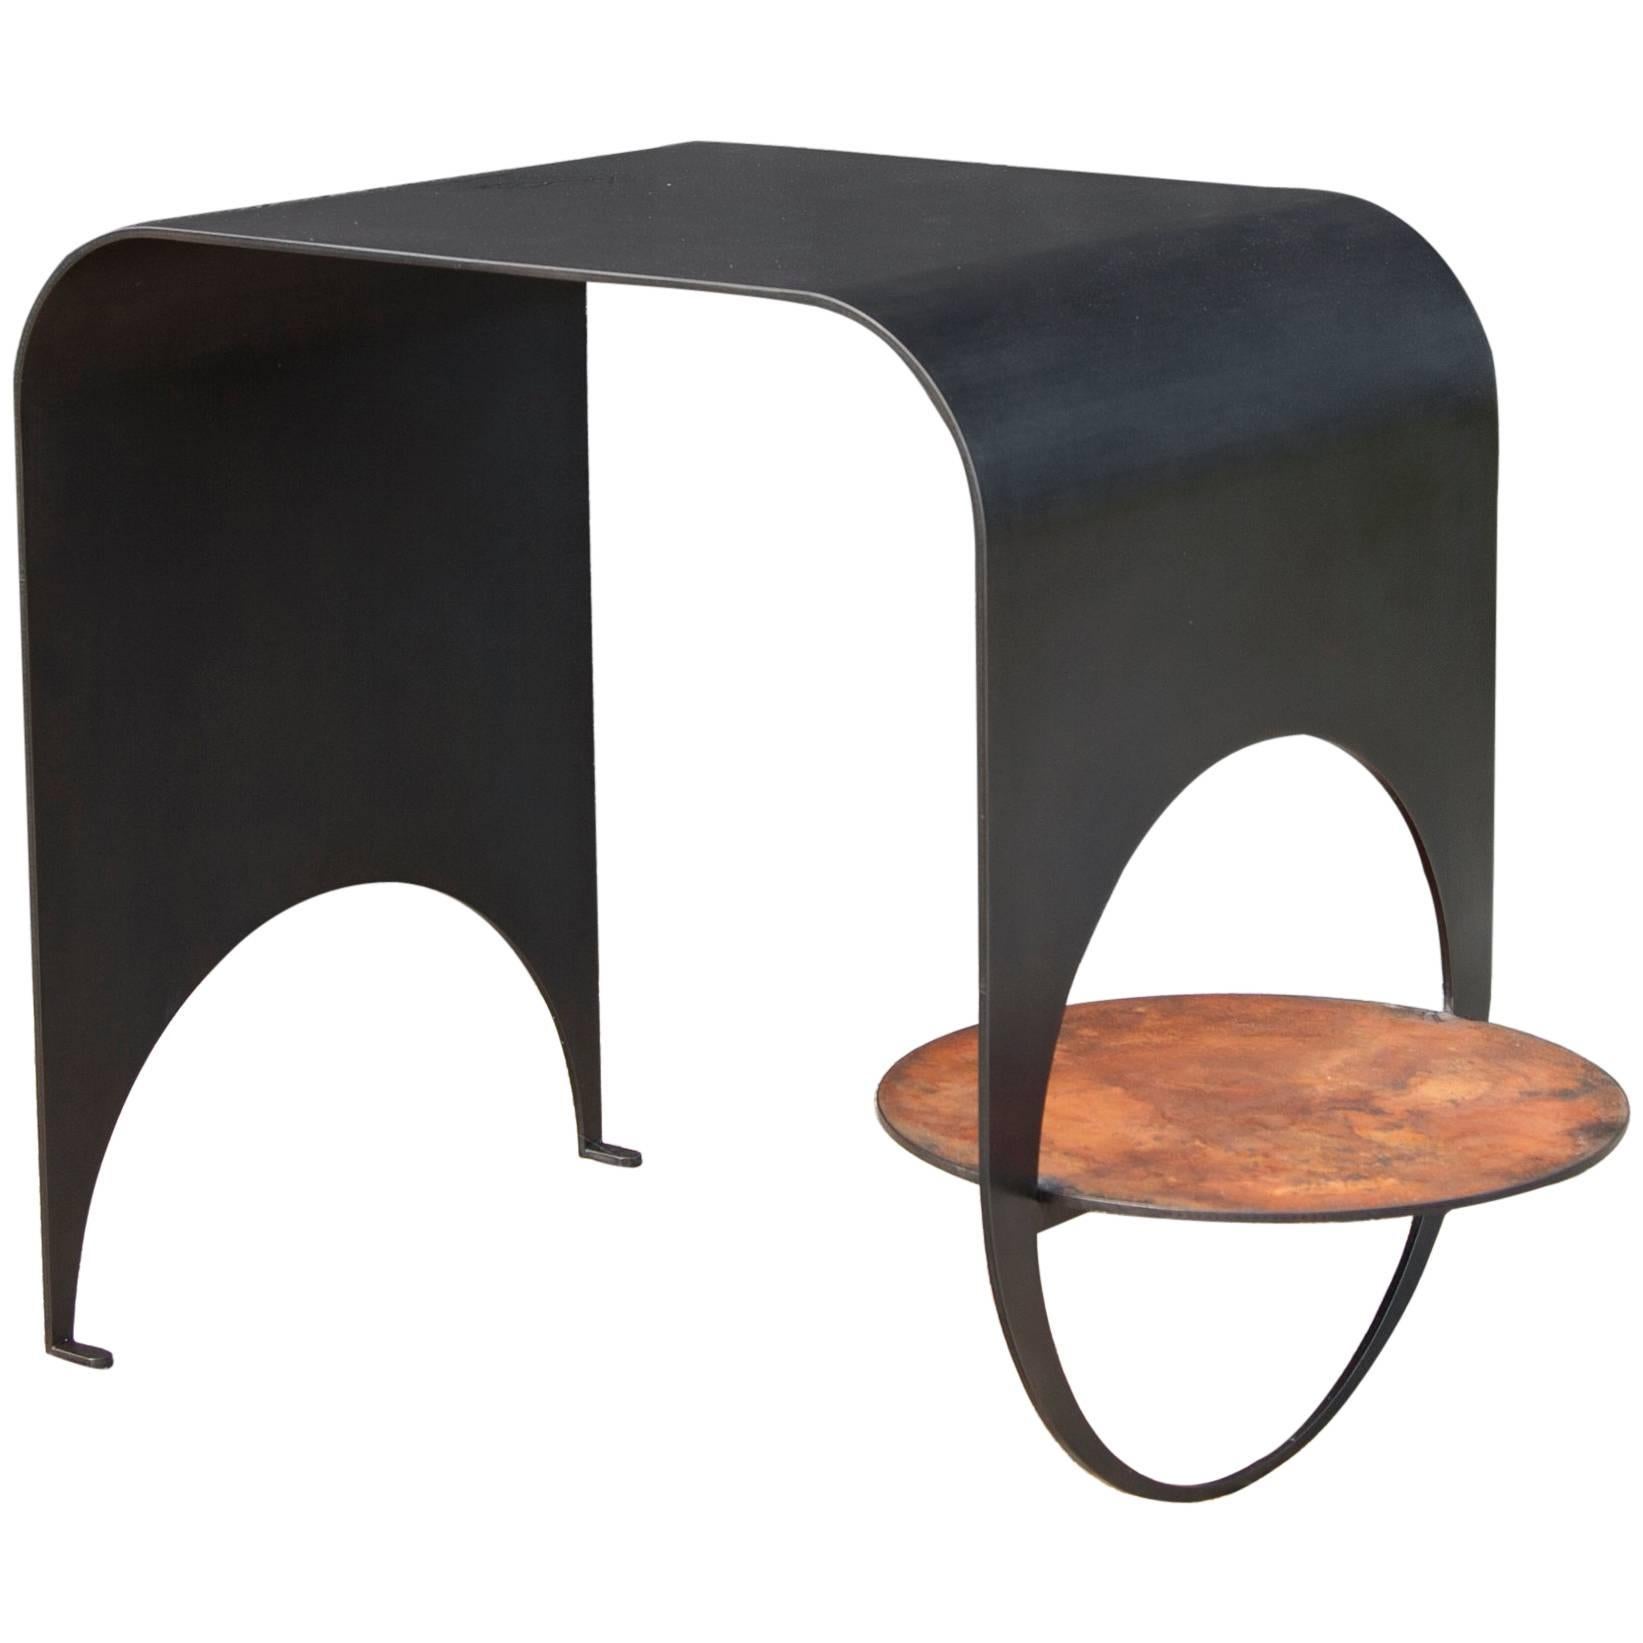 Thin Table 1 in Contemporary Blackened Steel and Oxidized Steel